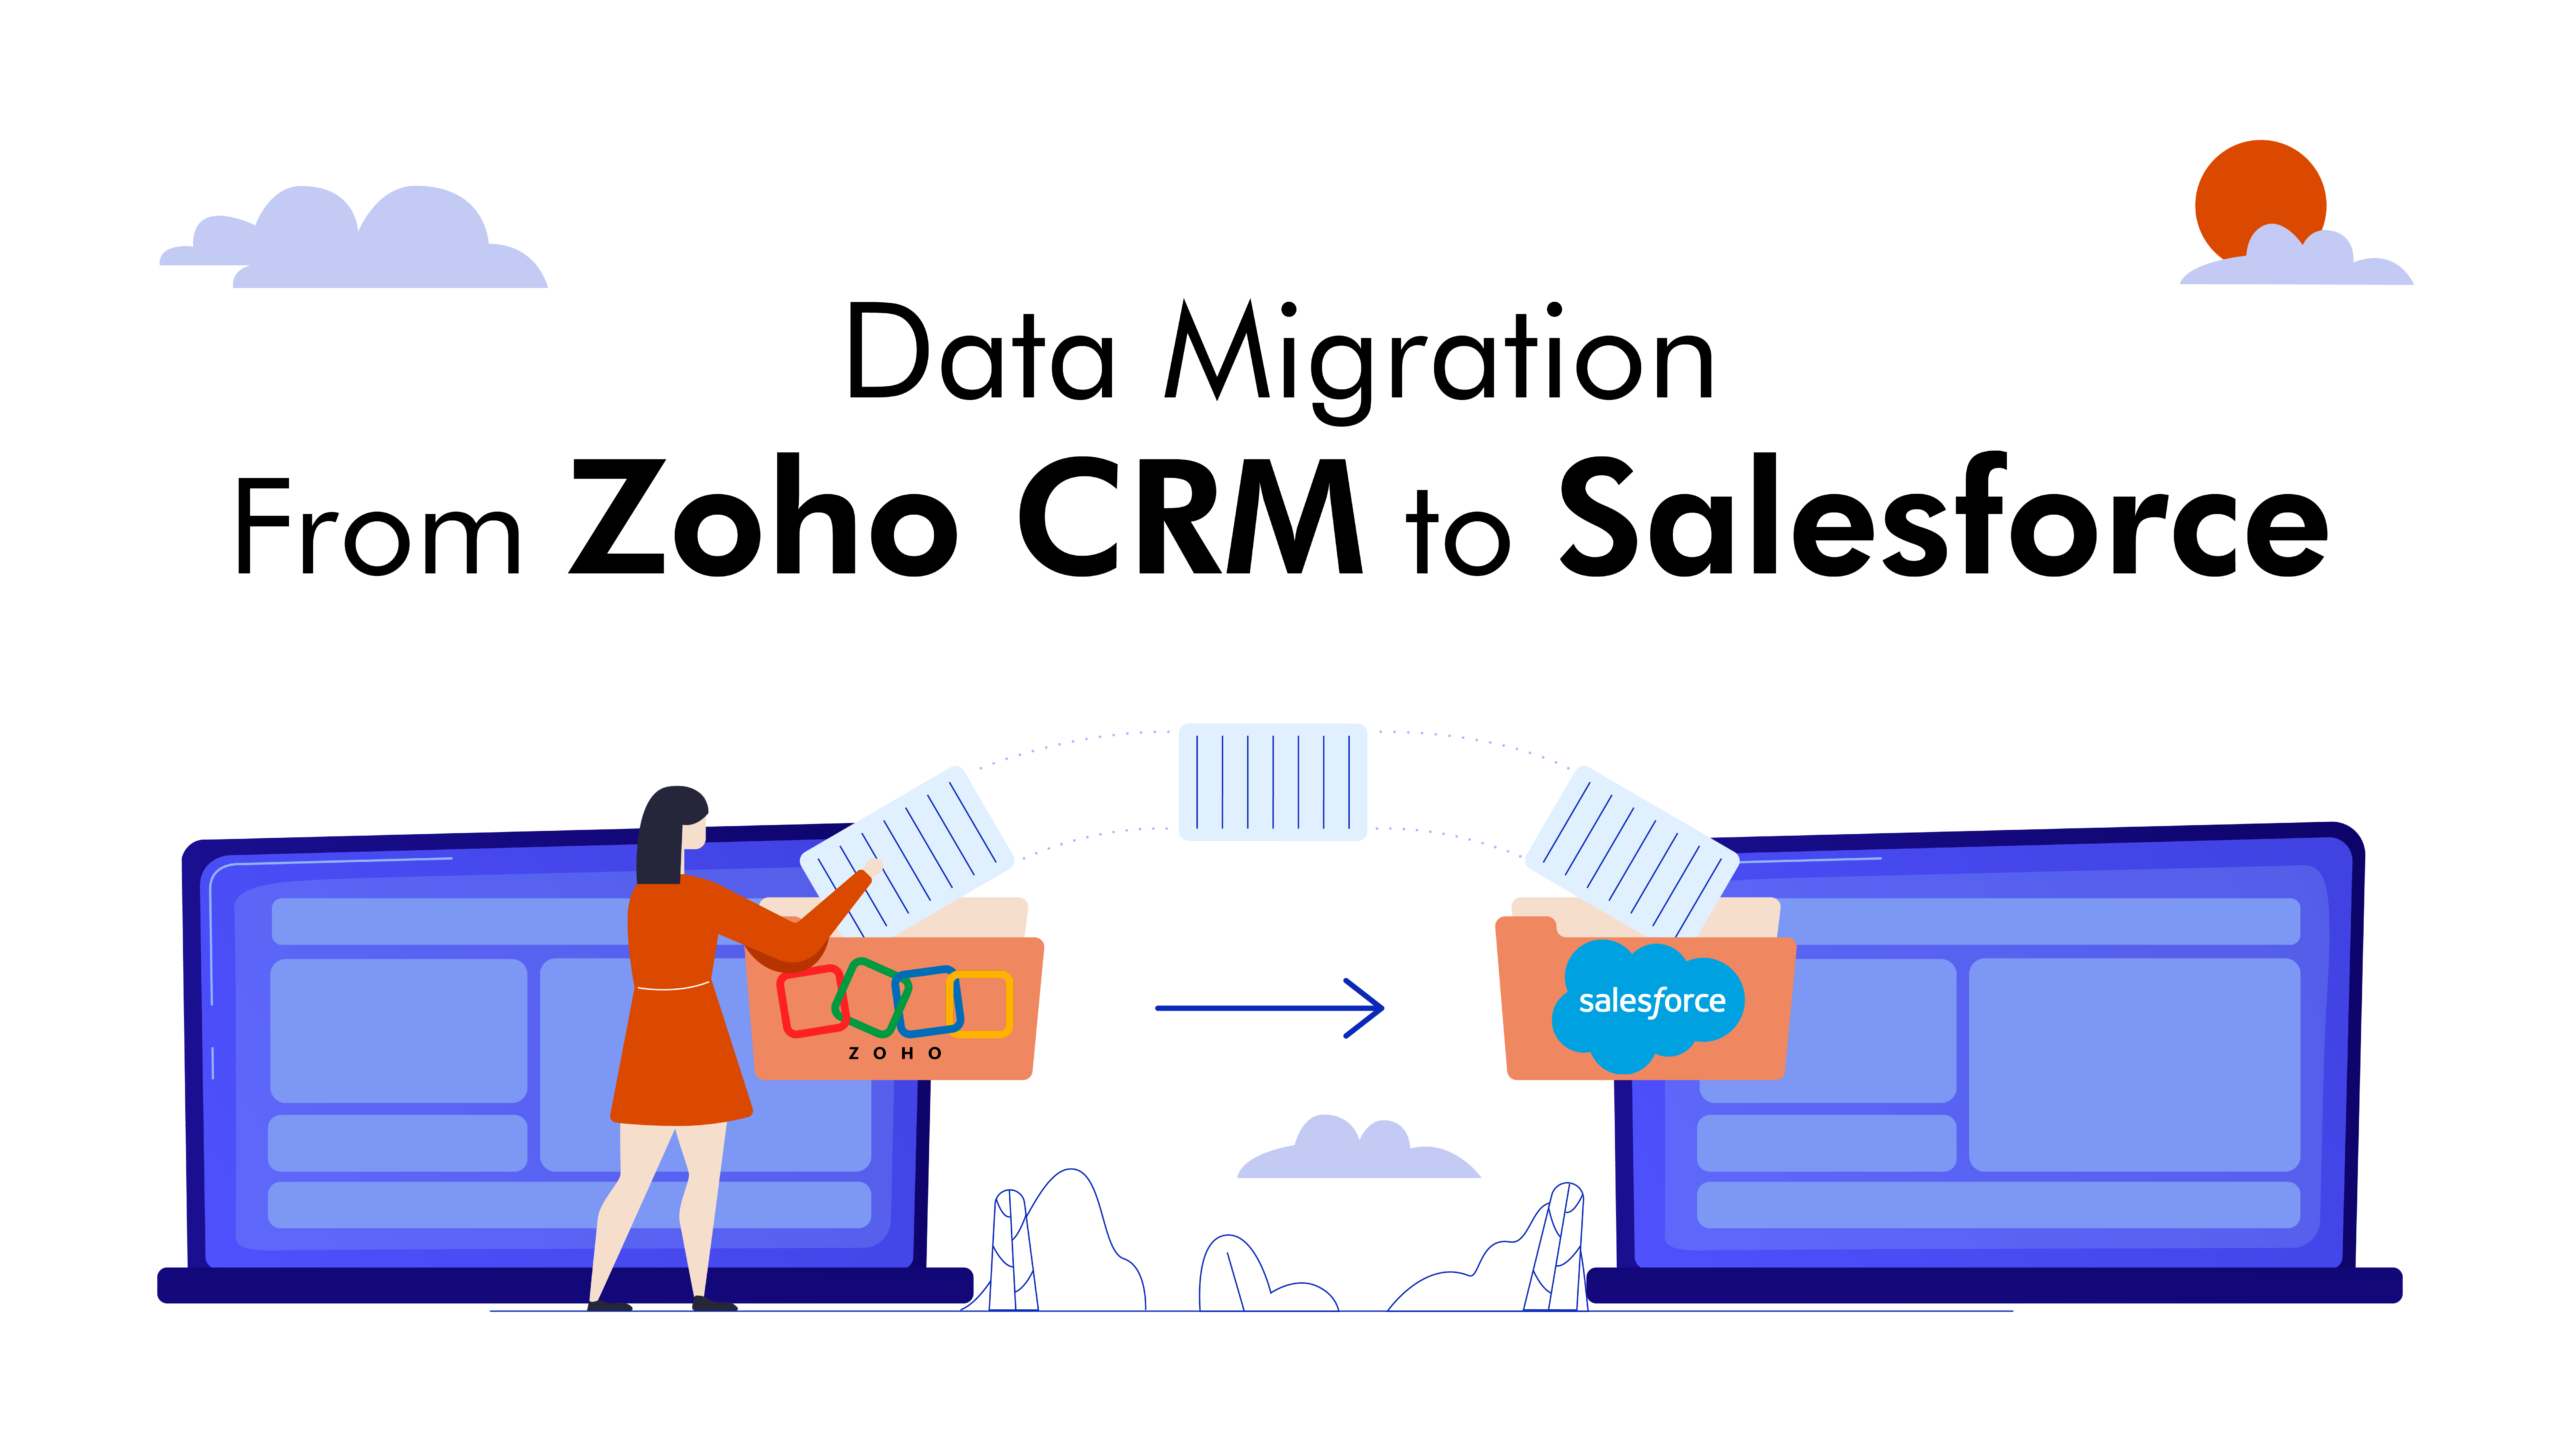 Data Migration from Zoho CRM to Salesforce